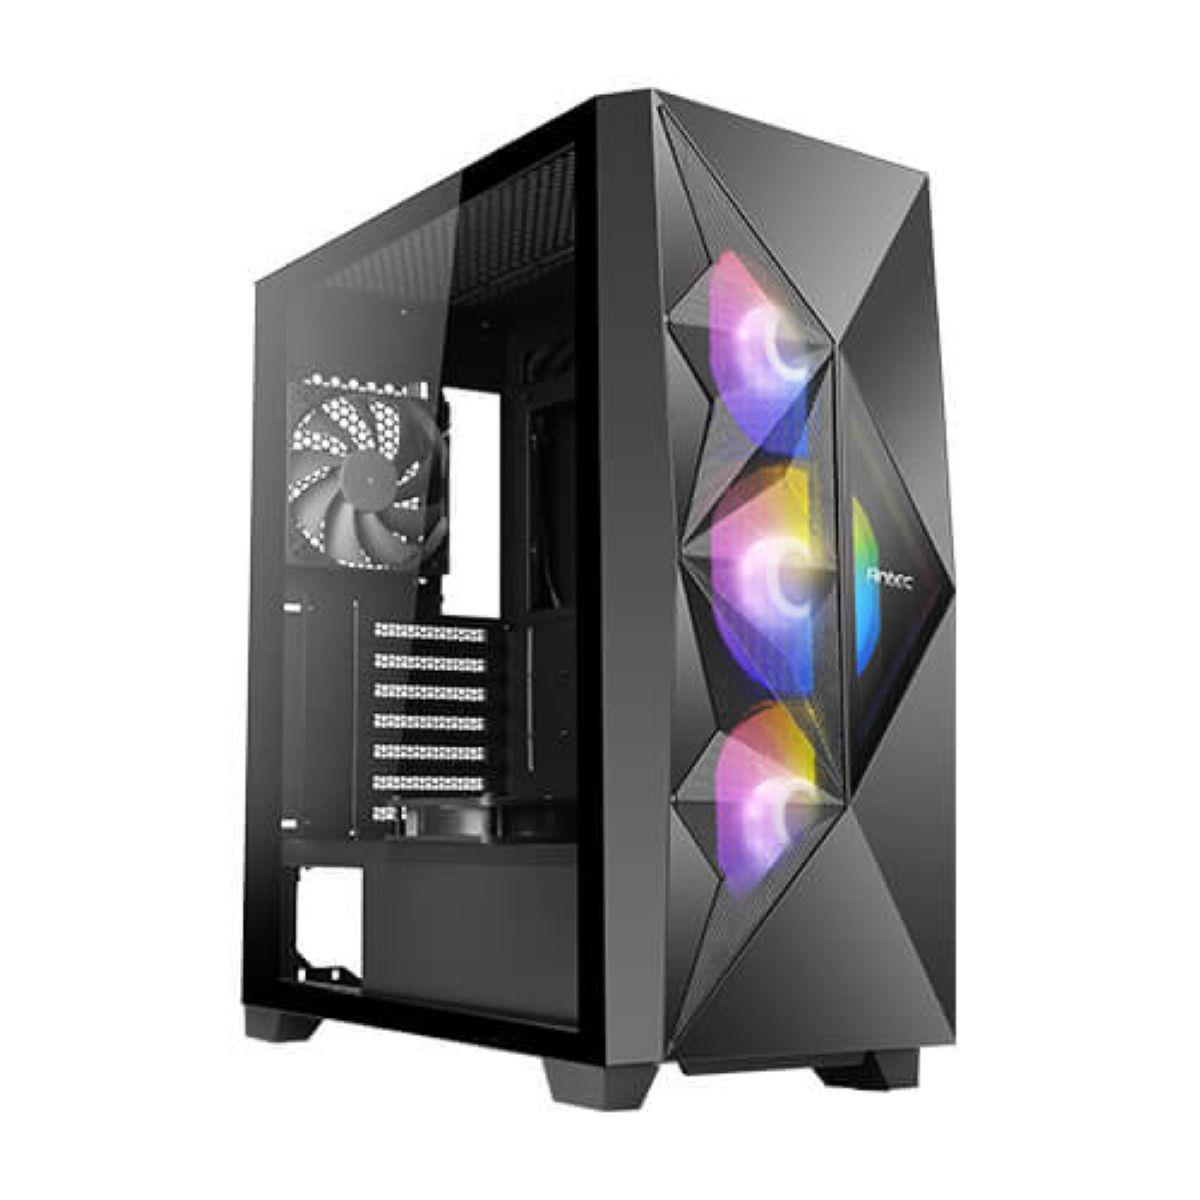 

Antec DF800 Flux ARGB Tempered Glass ATX Mid-Tower Gaming Computer Case, Black